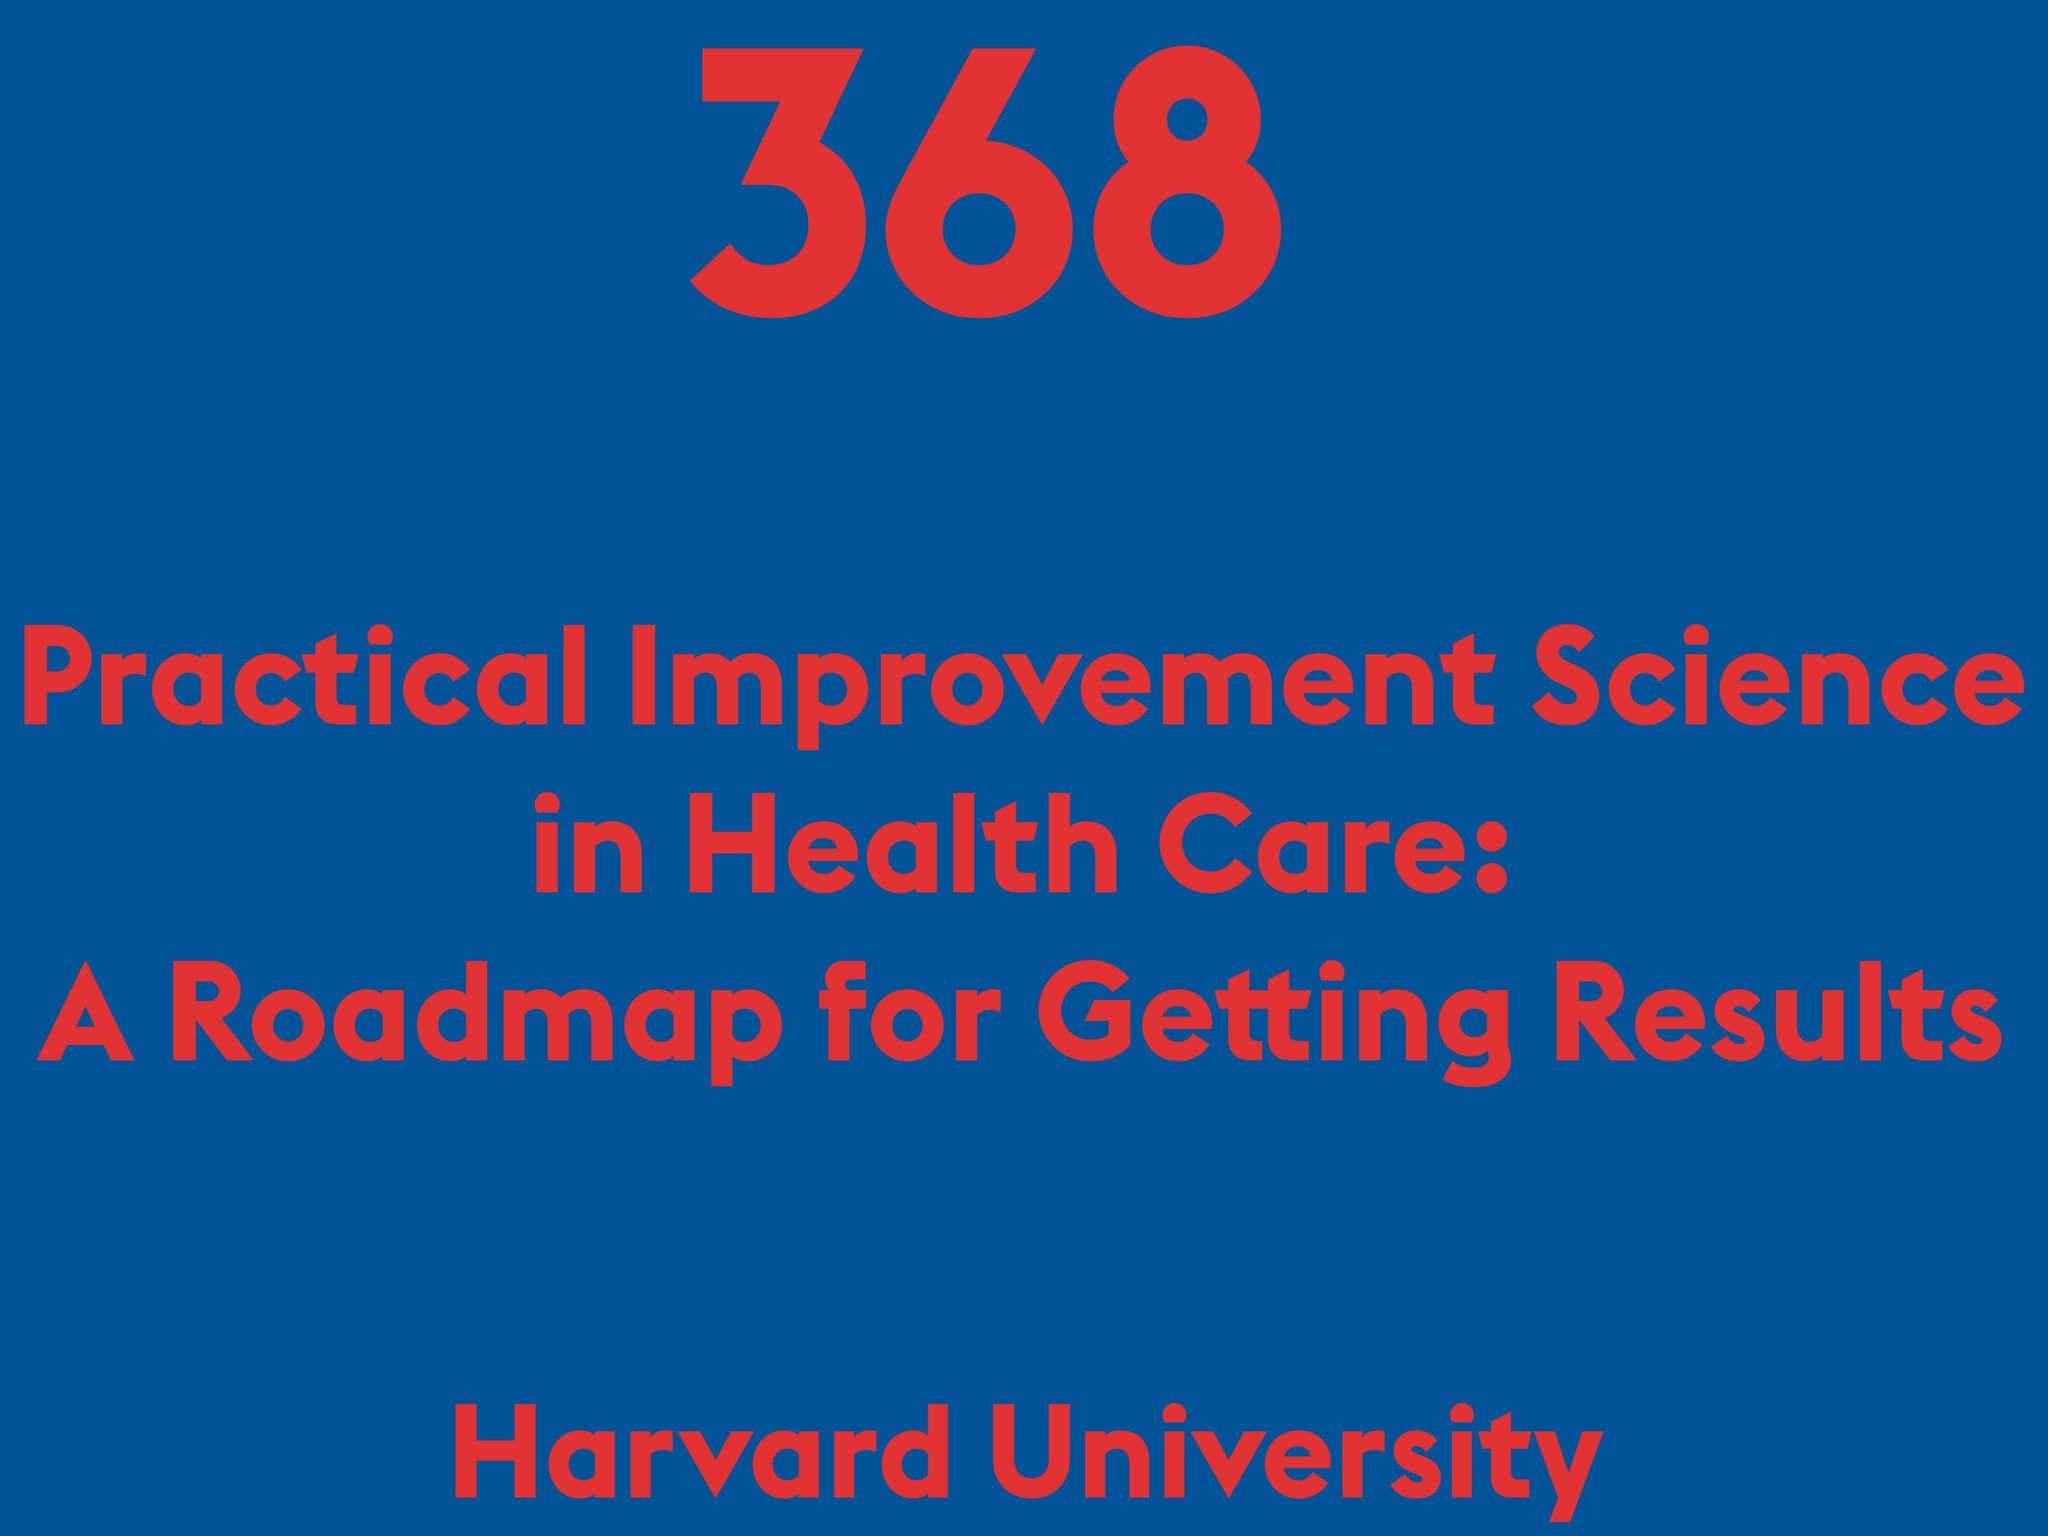 Practical Improvement Science in Health Care: A Roadmap for Getting Results